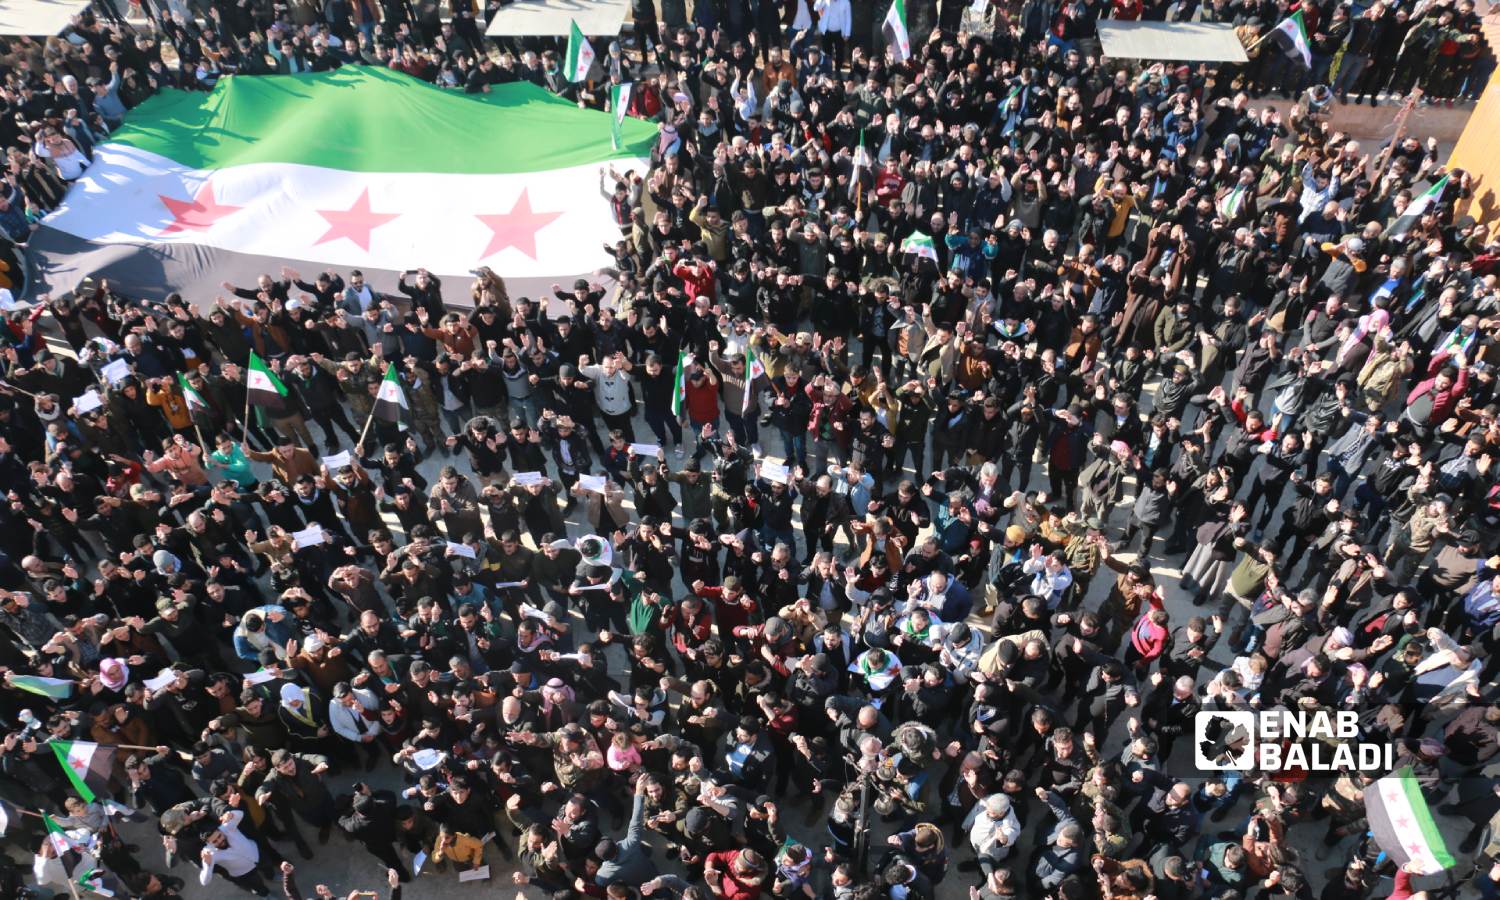 People of border Azaz city in the northern countryside of Aleppo went to the streets on Friday denouncing the Turkish statements about rapprochement with the Syrian regime, affirming the continuation of the Syrian revolution - 30 December 2022 (Enab Baladi/Dayan Junpaz)